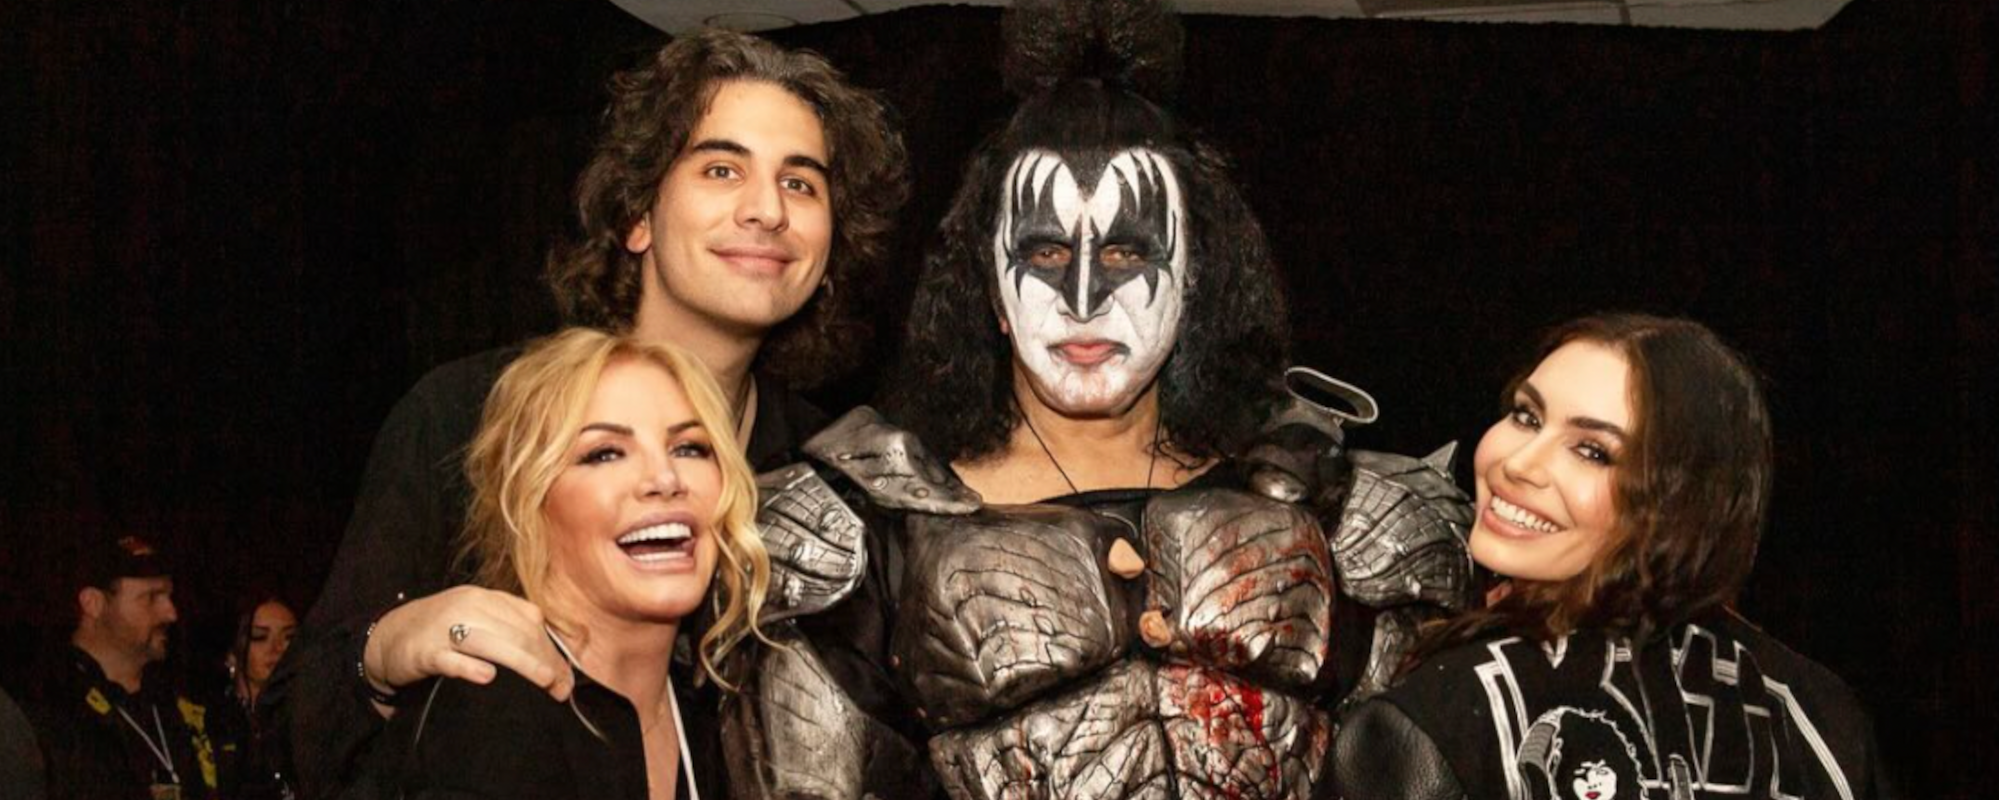 Gene Simmons’ Family Share Heartfelt Tribute as KISS Retires from Touring: “We’ve Always Been Your Biggest Fans”